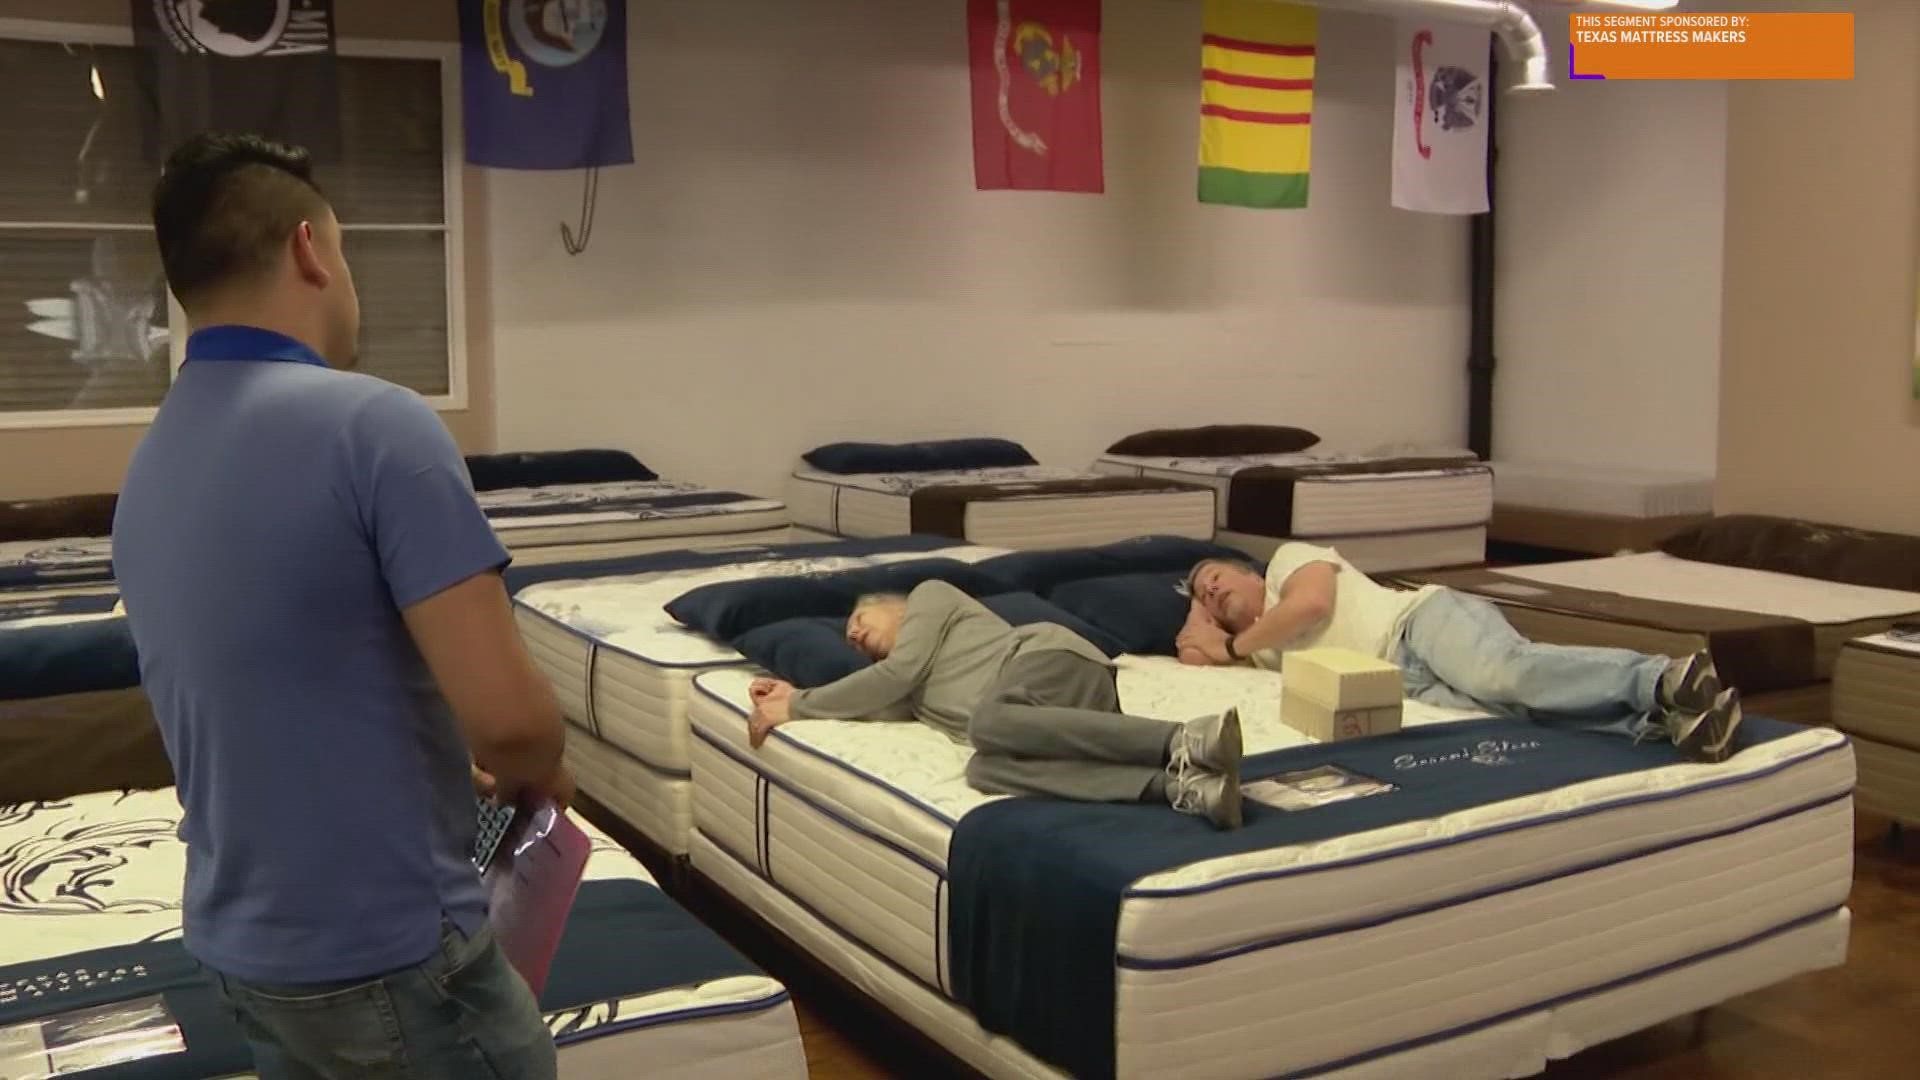 Texas Mattress Makers owner Youval Meicler shows us what's inside his mattresses and how the right materials help you get a great night's sleep.